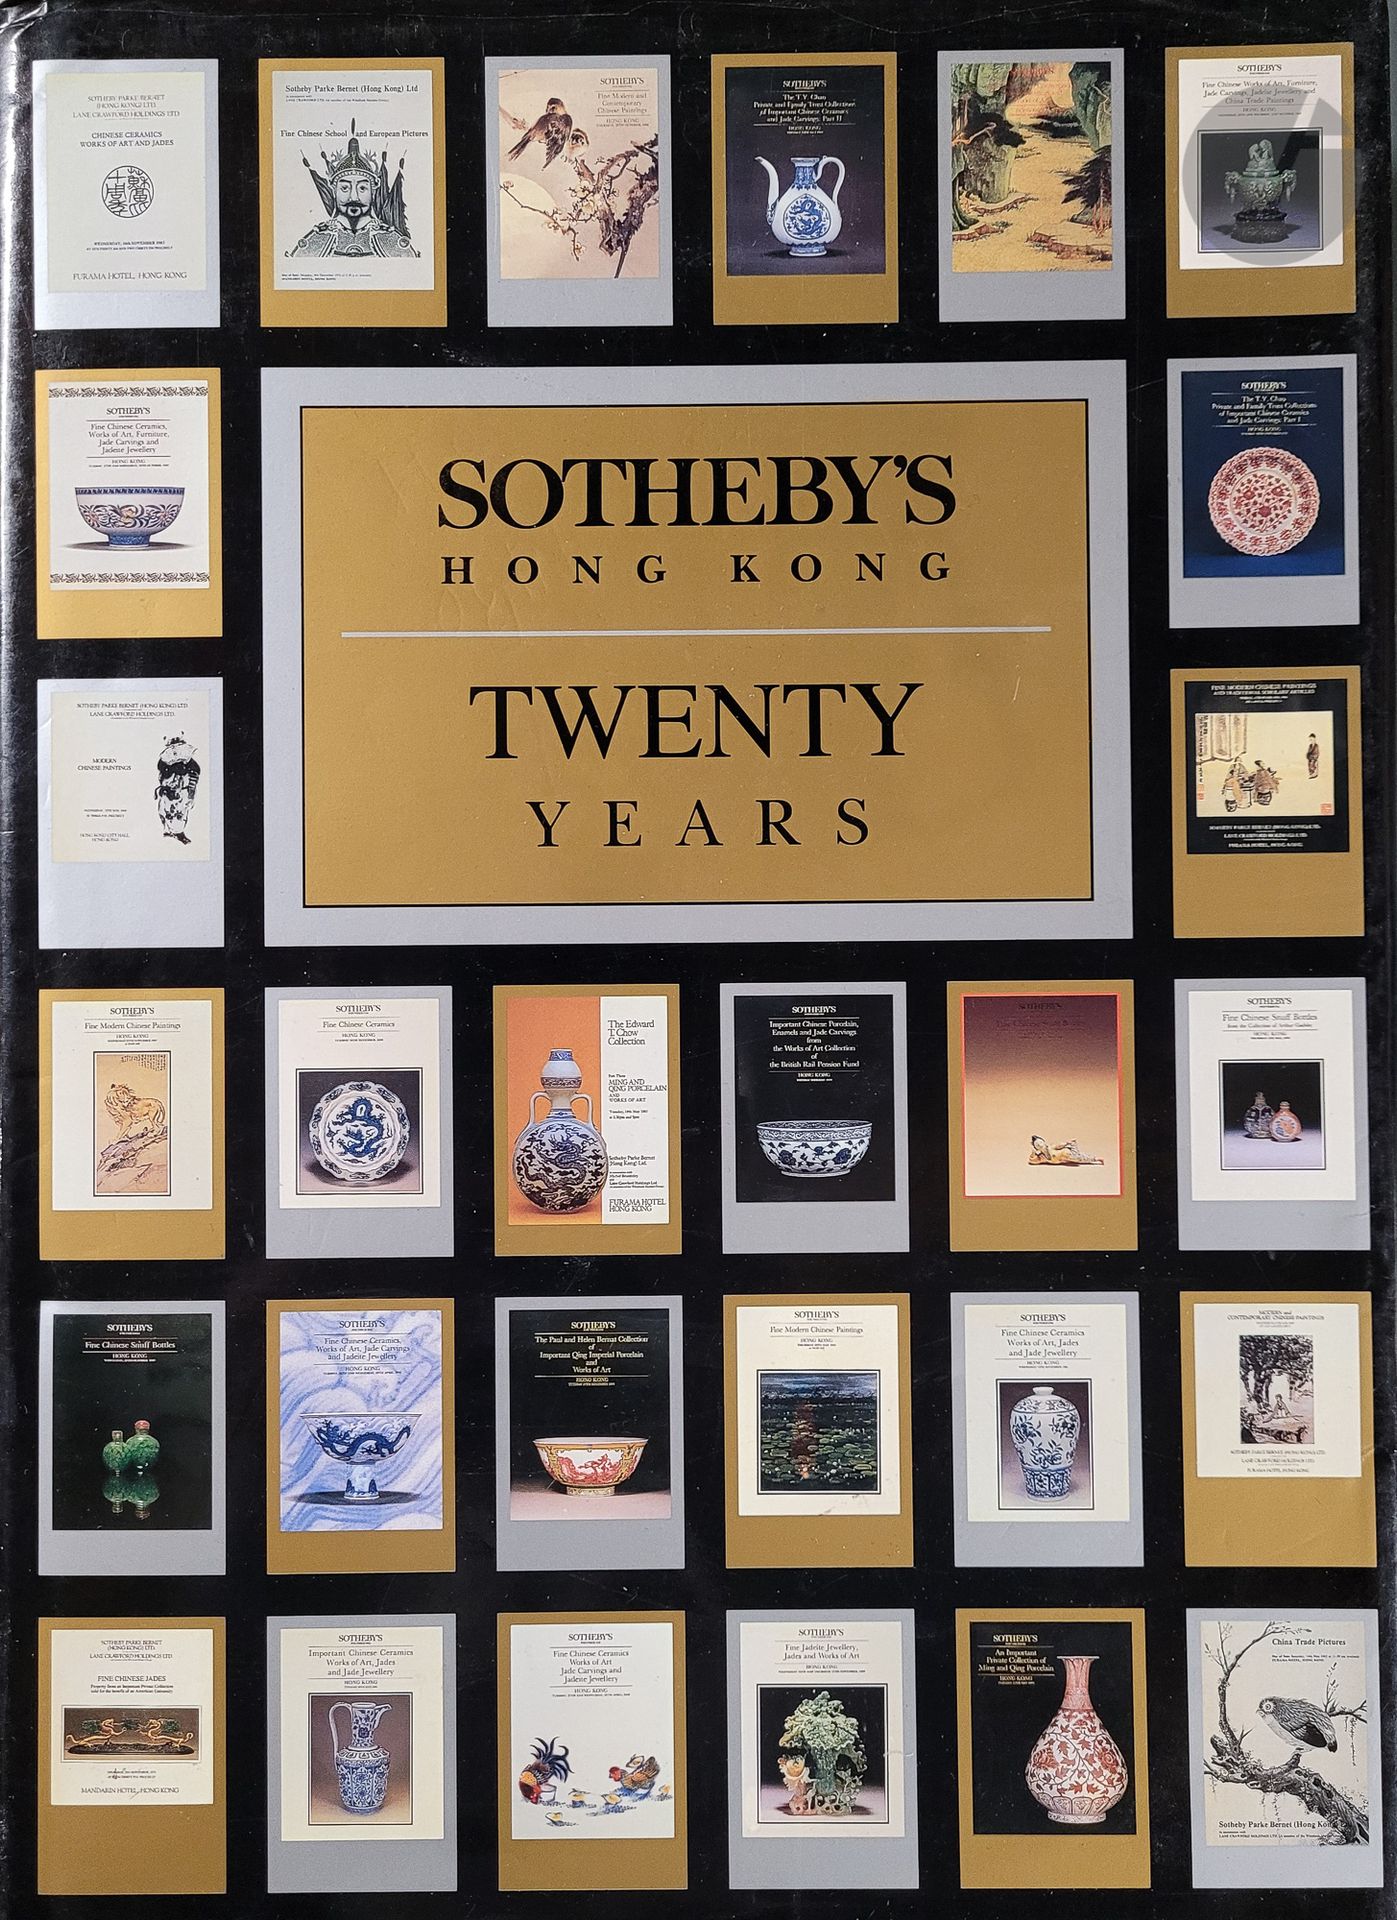 Null [SOTHEBY’S MASTERPIECES] 
Sotheby’s Hong Kong : Twenty Years, 1973-1993.
Pu&hellip;